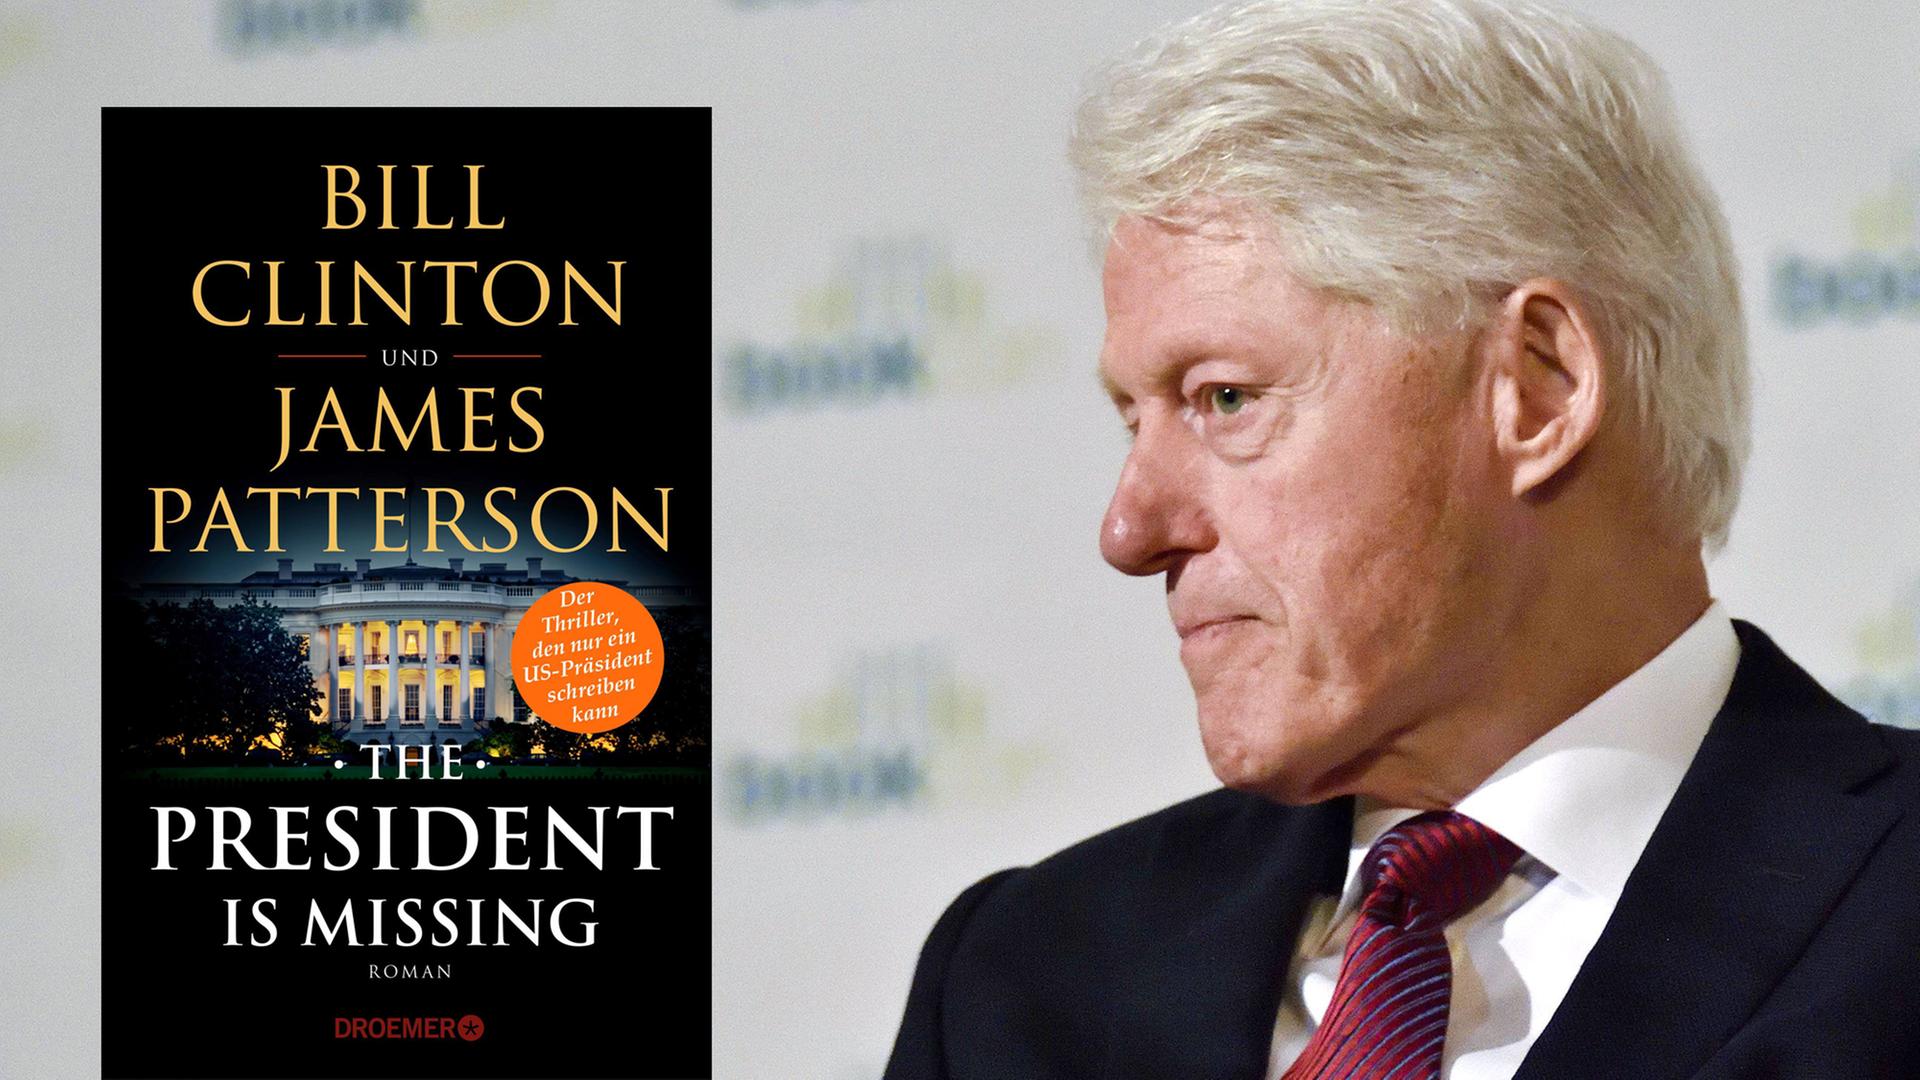 Buchcover Bill Clinton/James Patterson: "The President Is Missing"